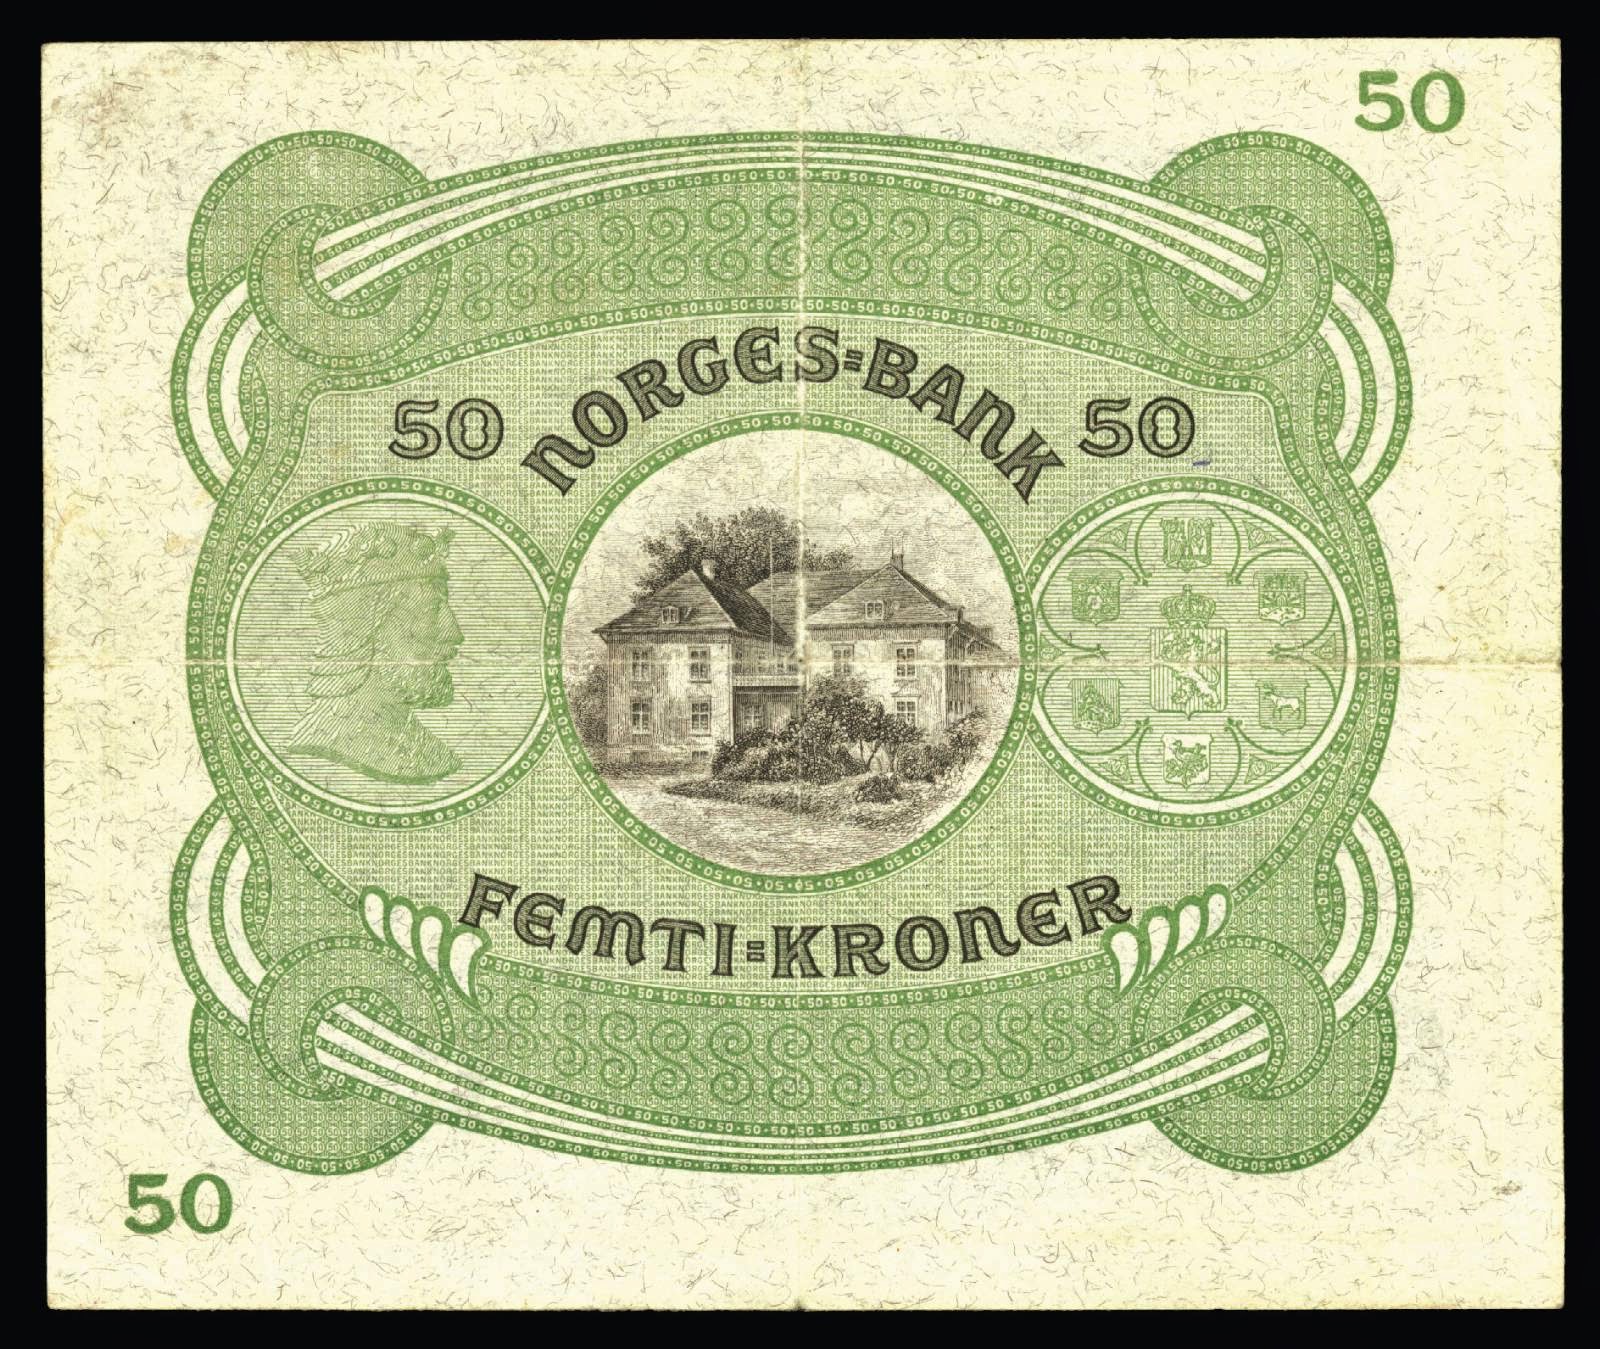 Banknotes of the Norwegian krone